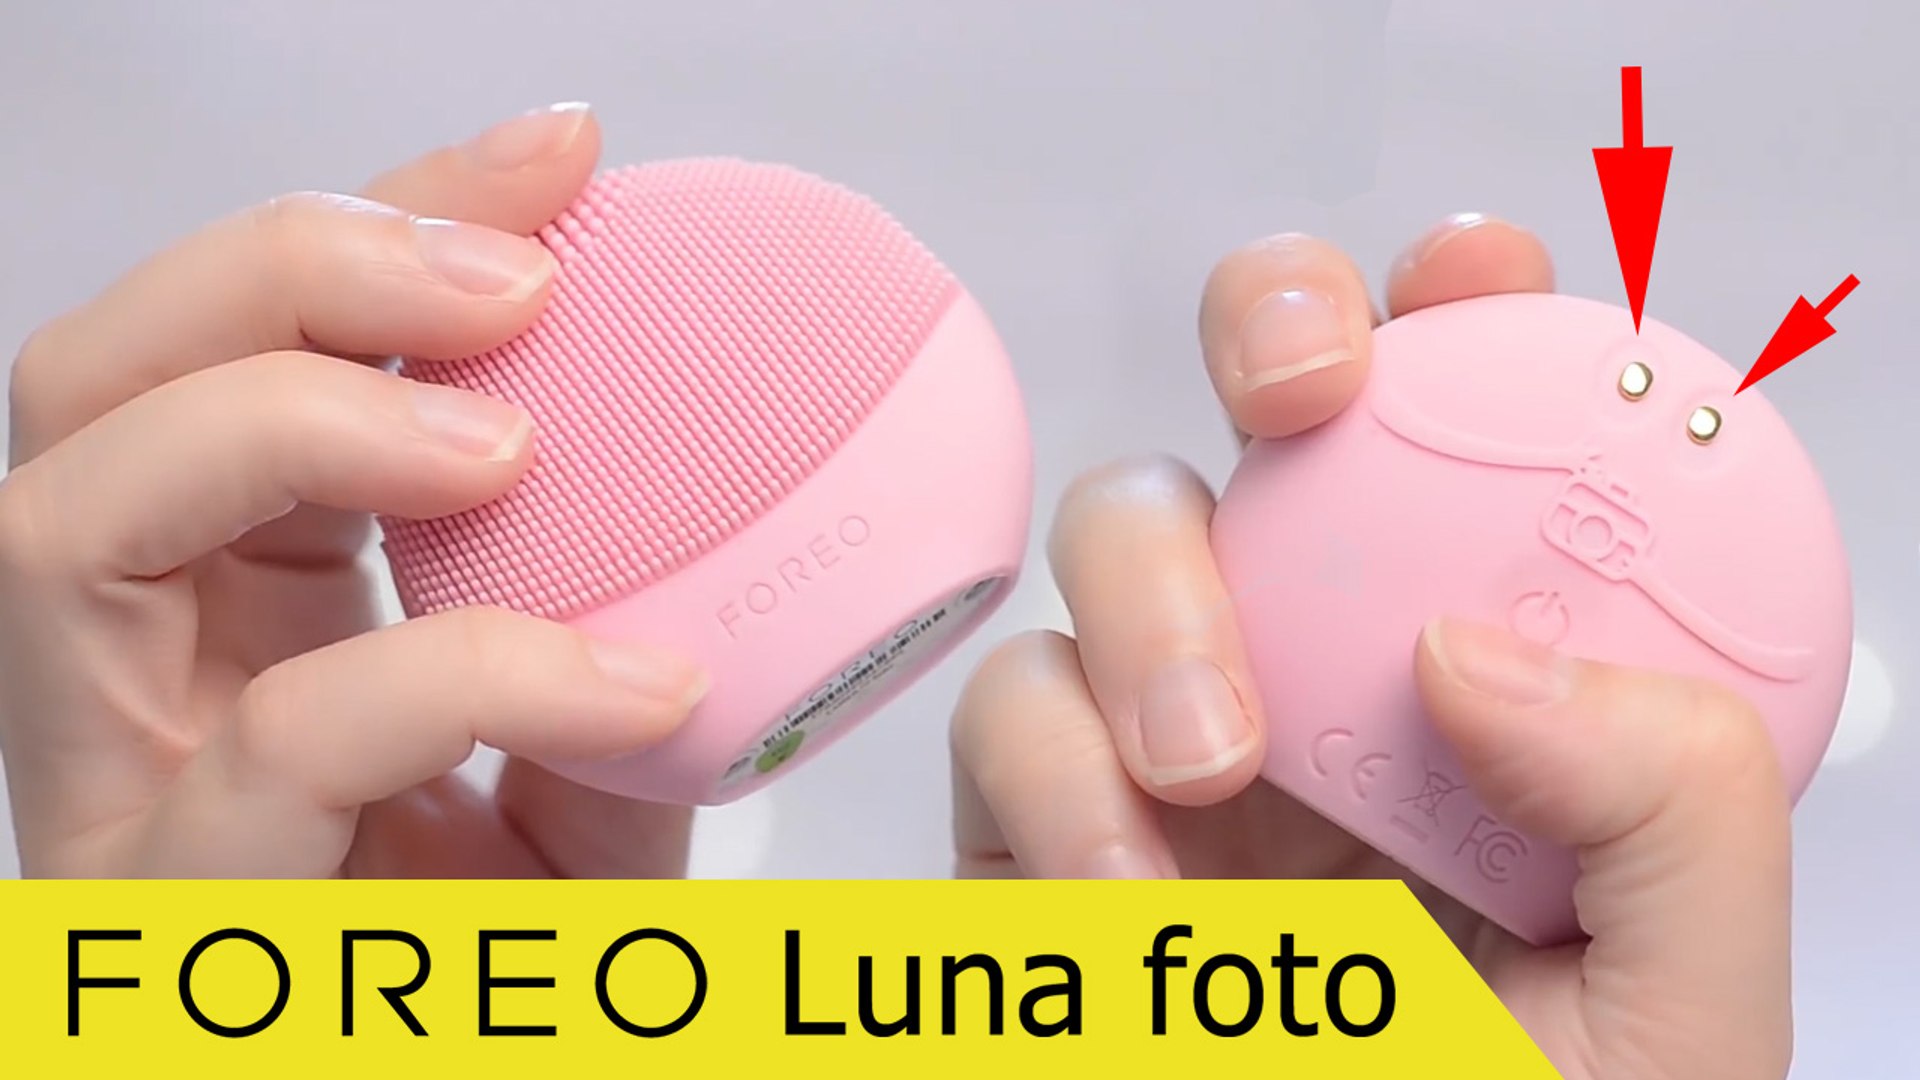 Foreo Luna Foto reviews + How to use & replace battery - Video Dailymotion